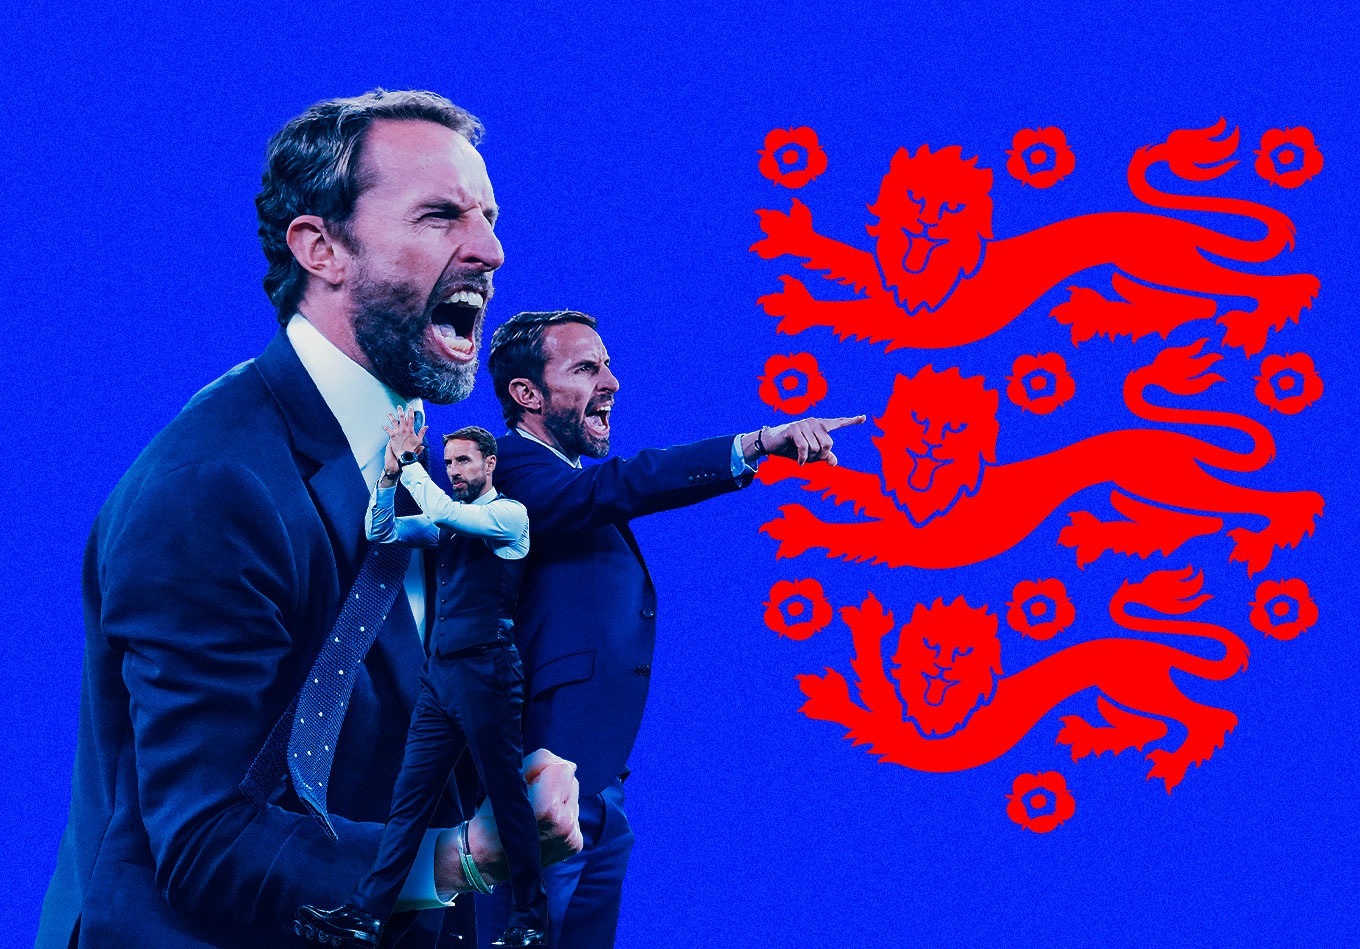 England’s Five Years of Southgate: Three Lions Show Their Teeth, Hunt World Cup Glory